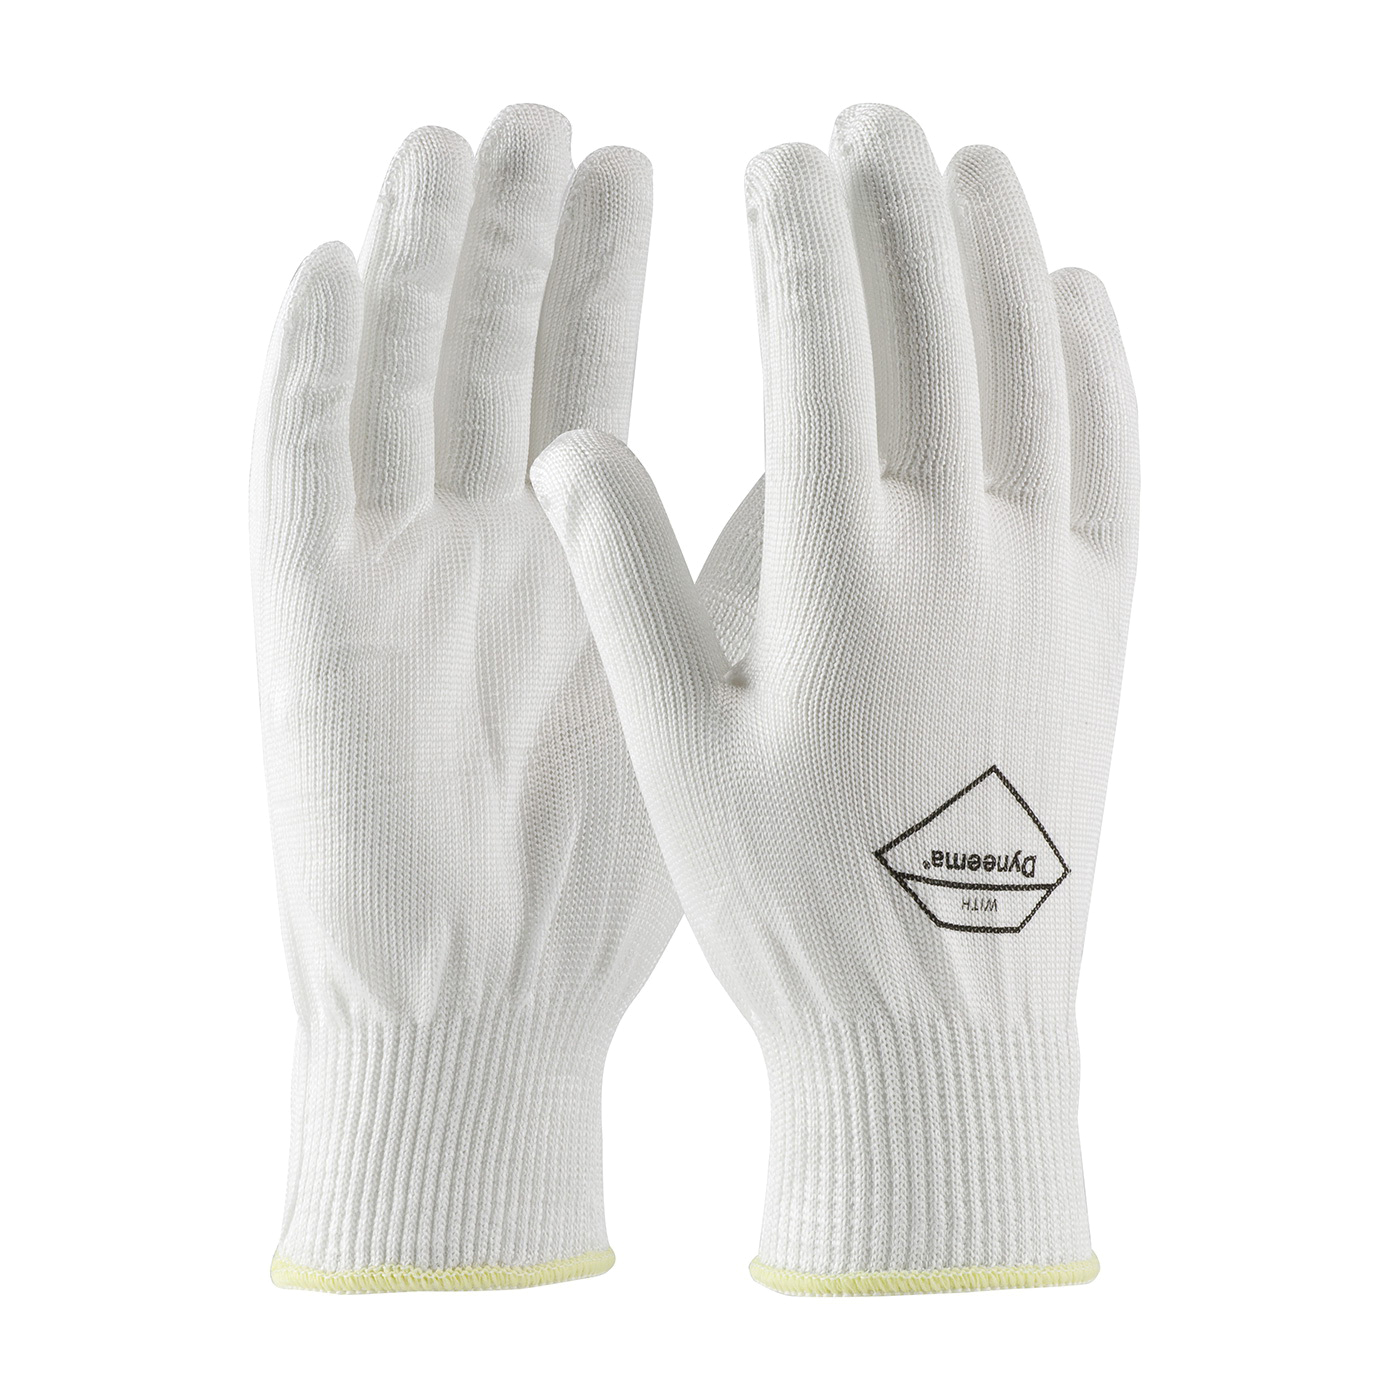 PIP® Kut-Gard® 17-D200 Lightweight Unisex Cut Resistant Gloves, Dyneema®, Continuous Knit Wrist Cuff, Resists: Cut, ANSI Cut-Resistance Level: A2, Paired Hand